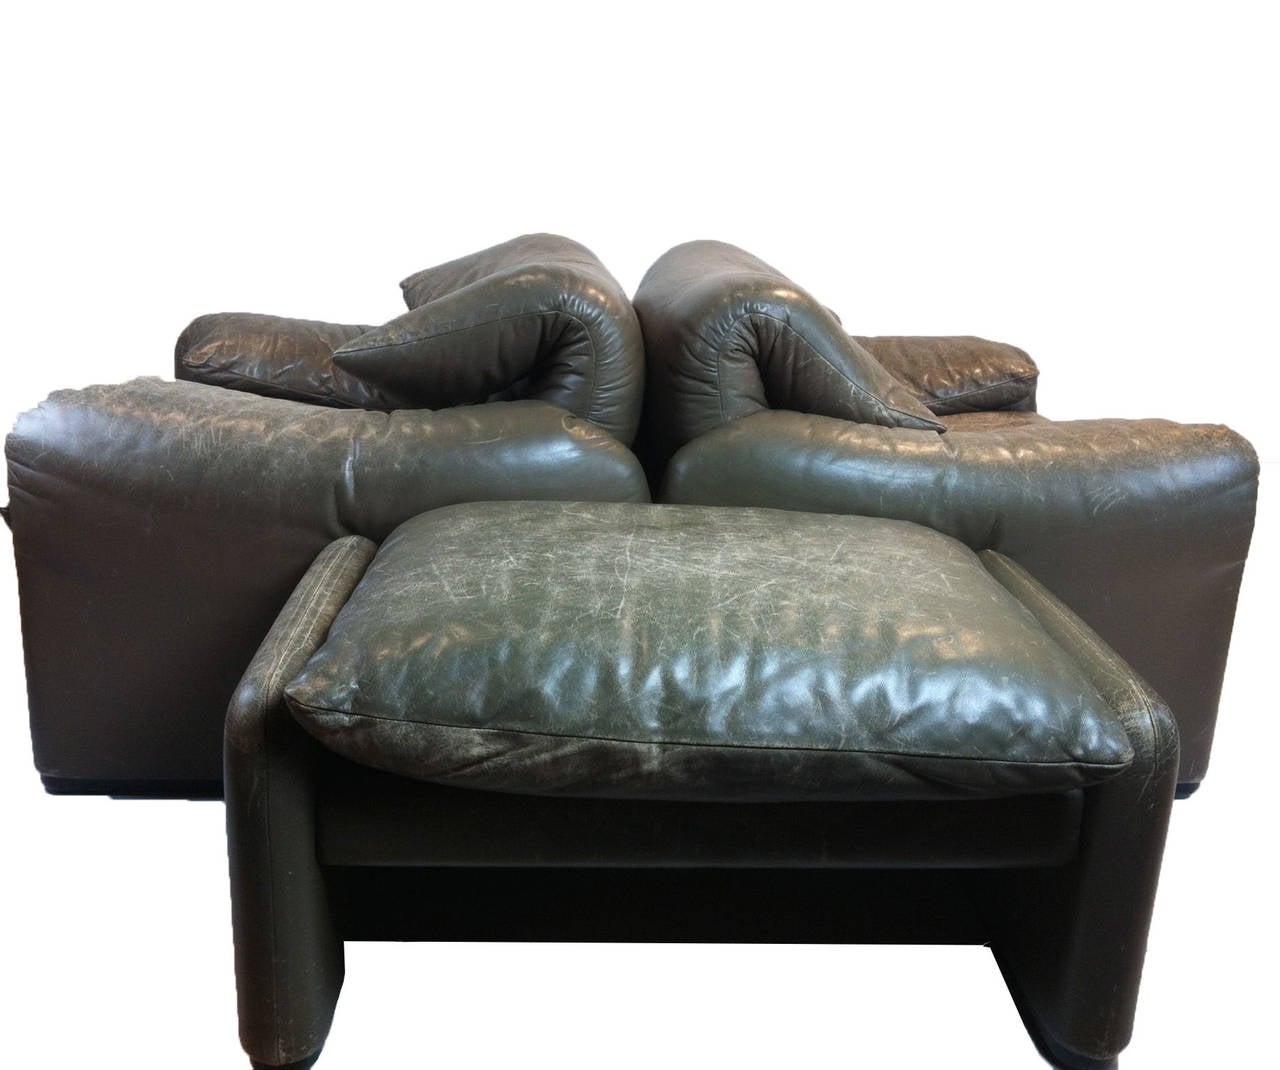 Italian Pair of Lounge Chairs with Ottoman by Vico Magistretti for Cassina